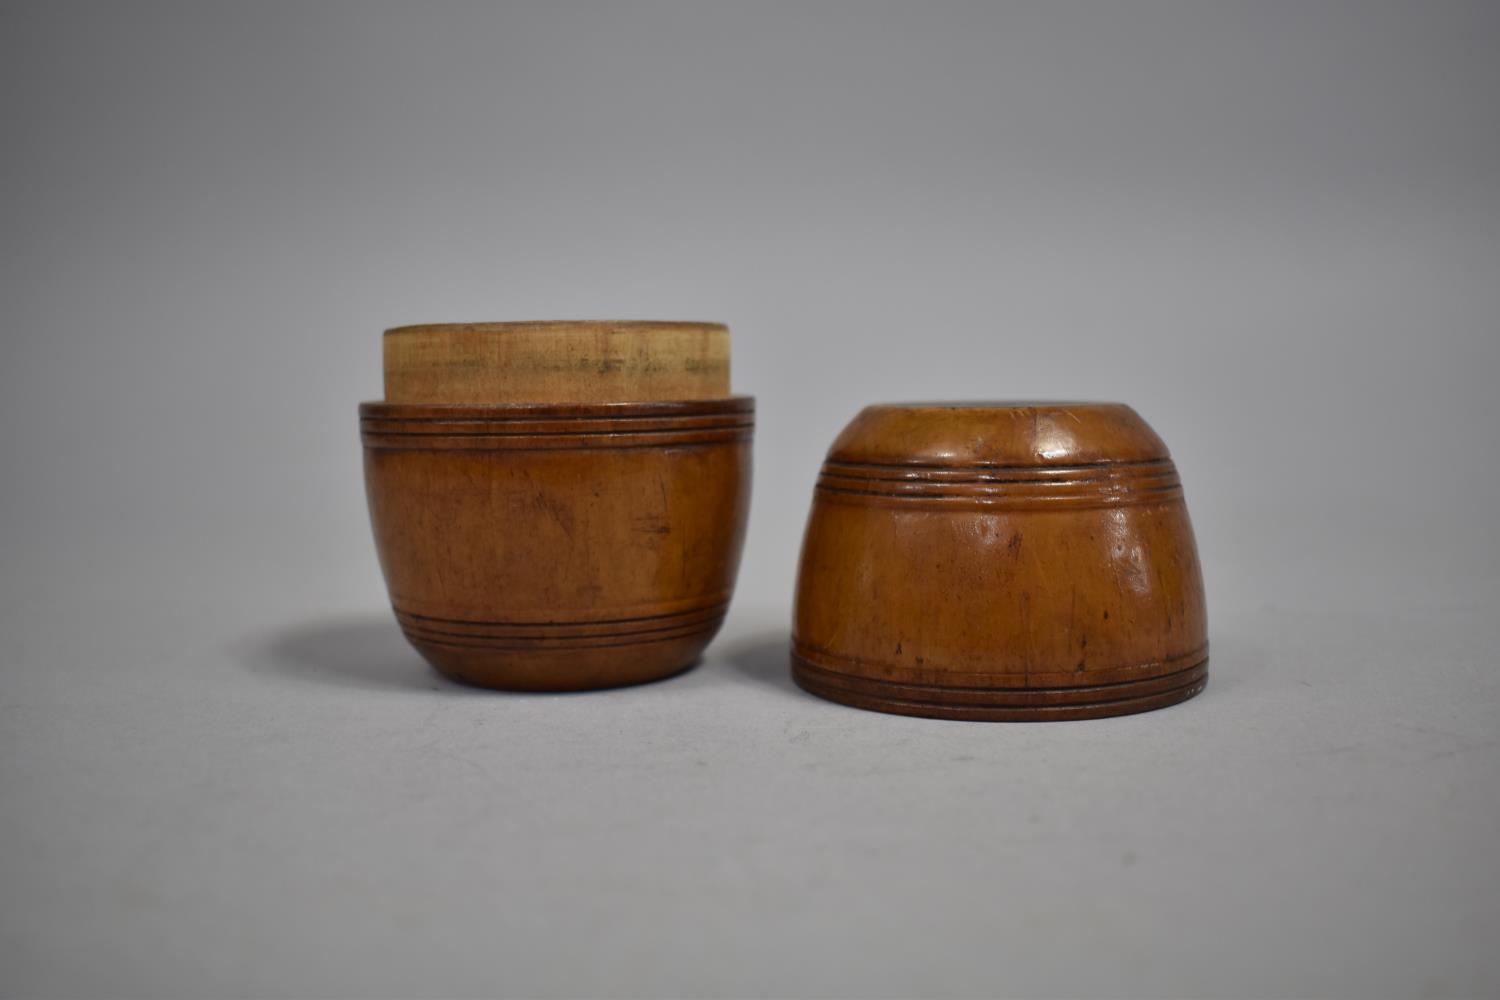 A Late 19th/Early 20th Century Treen Box in the Form of a Barrel, 9.5cm high - Image 3 of 3